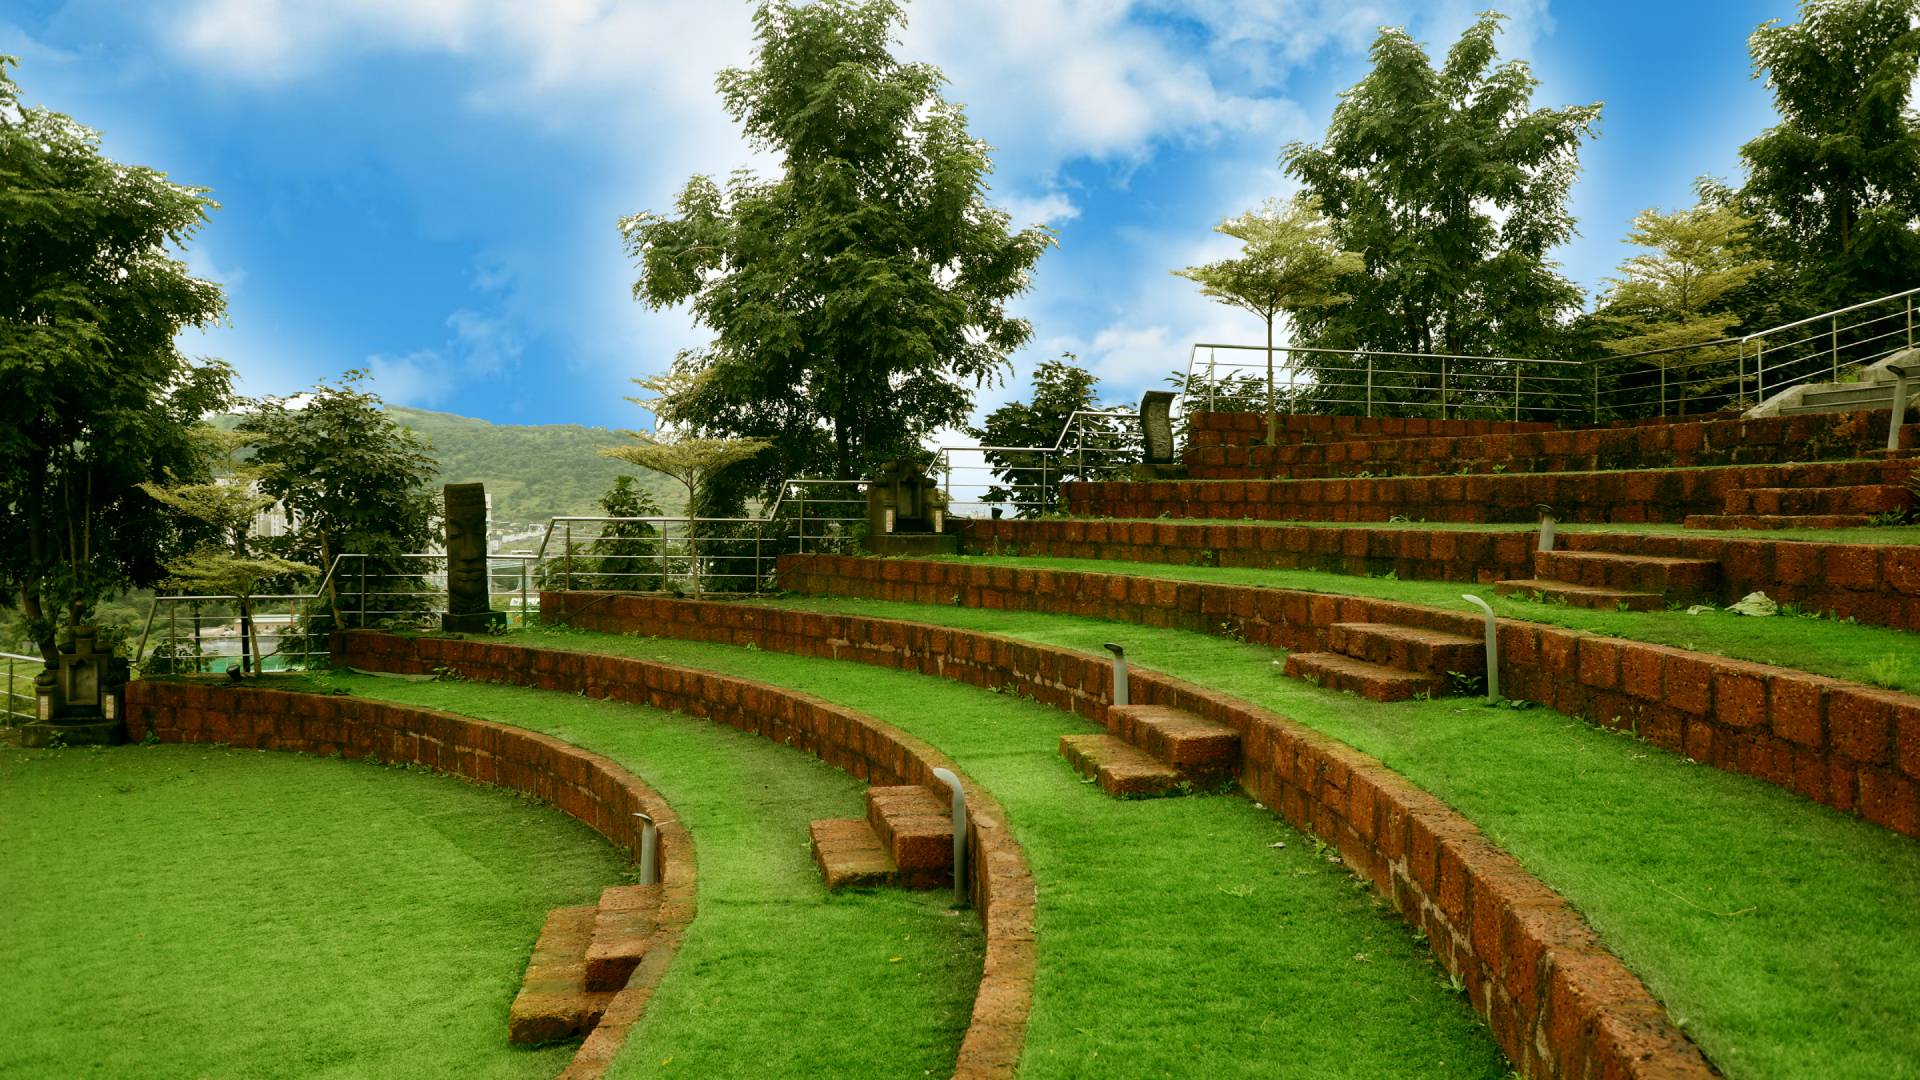 The Laterite - Hilltop Amphitheatre at Sunny's World Pune (5)